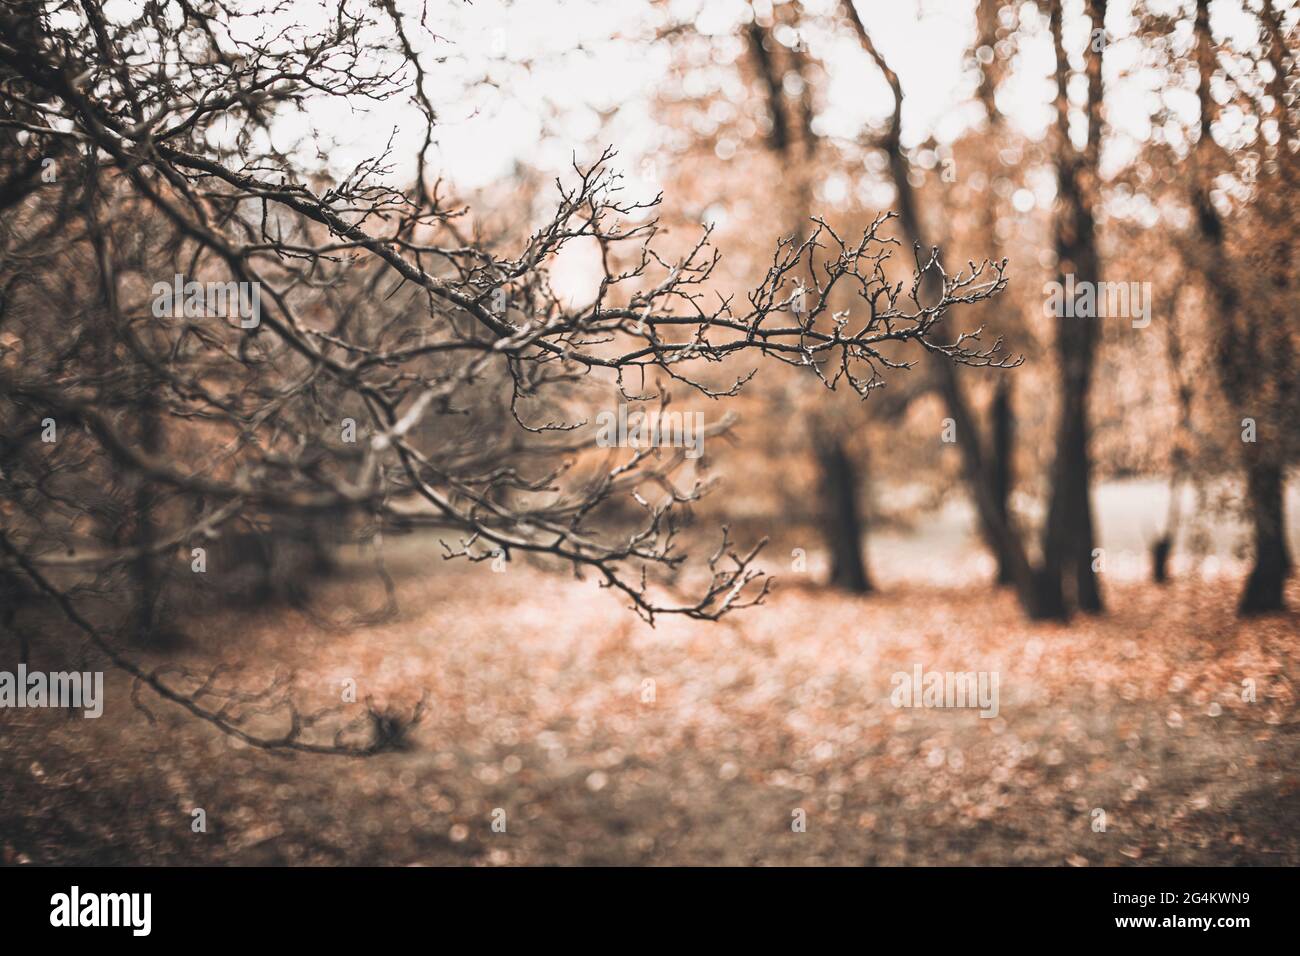 autumn scene with brown branches on blurred fall leaves background Stock Photo